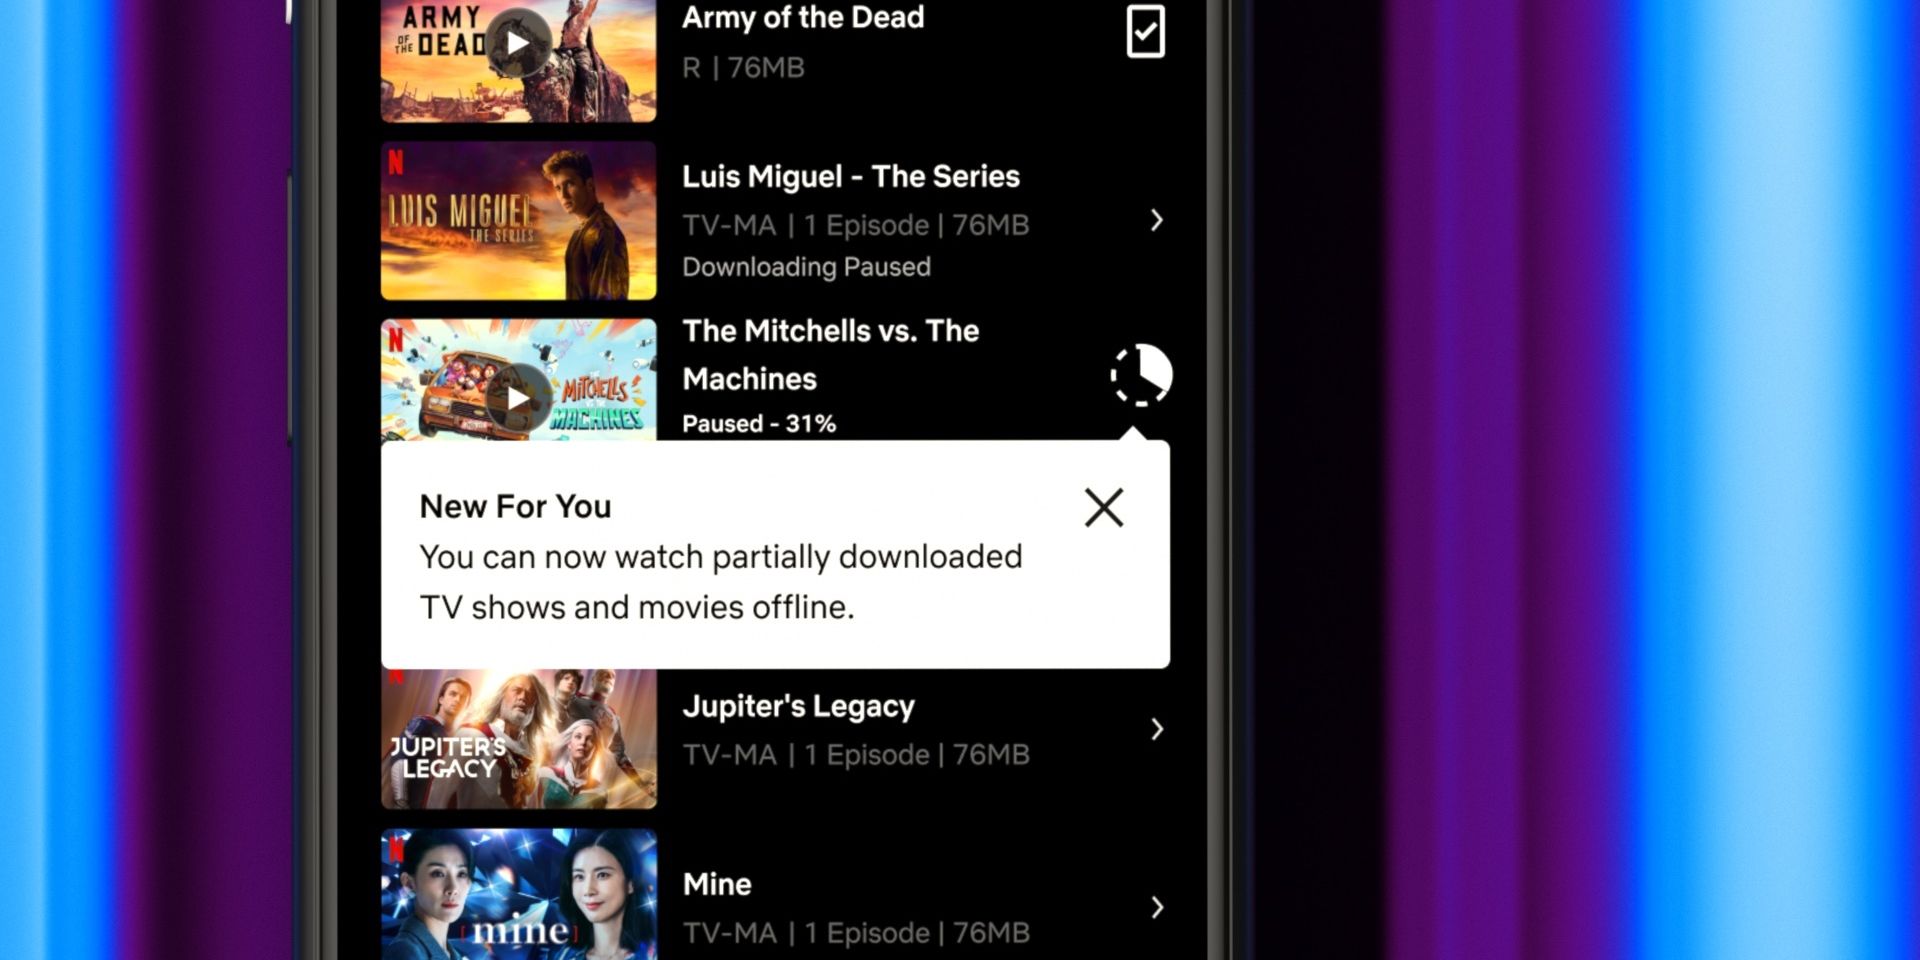 Netflix On Android Just Got A New Feature The iPhone Doesn’t Have